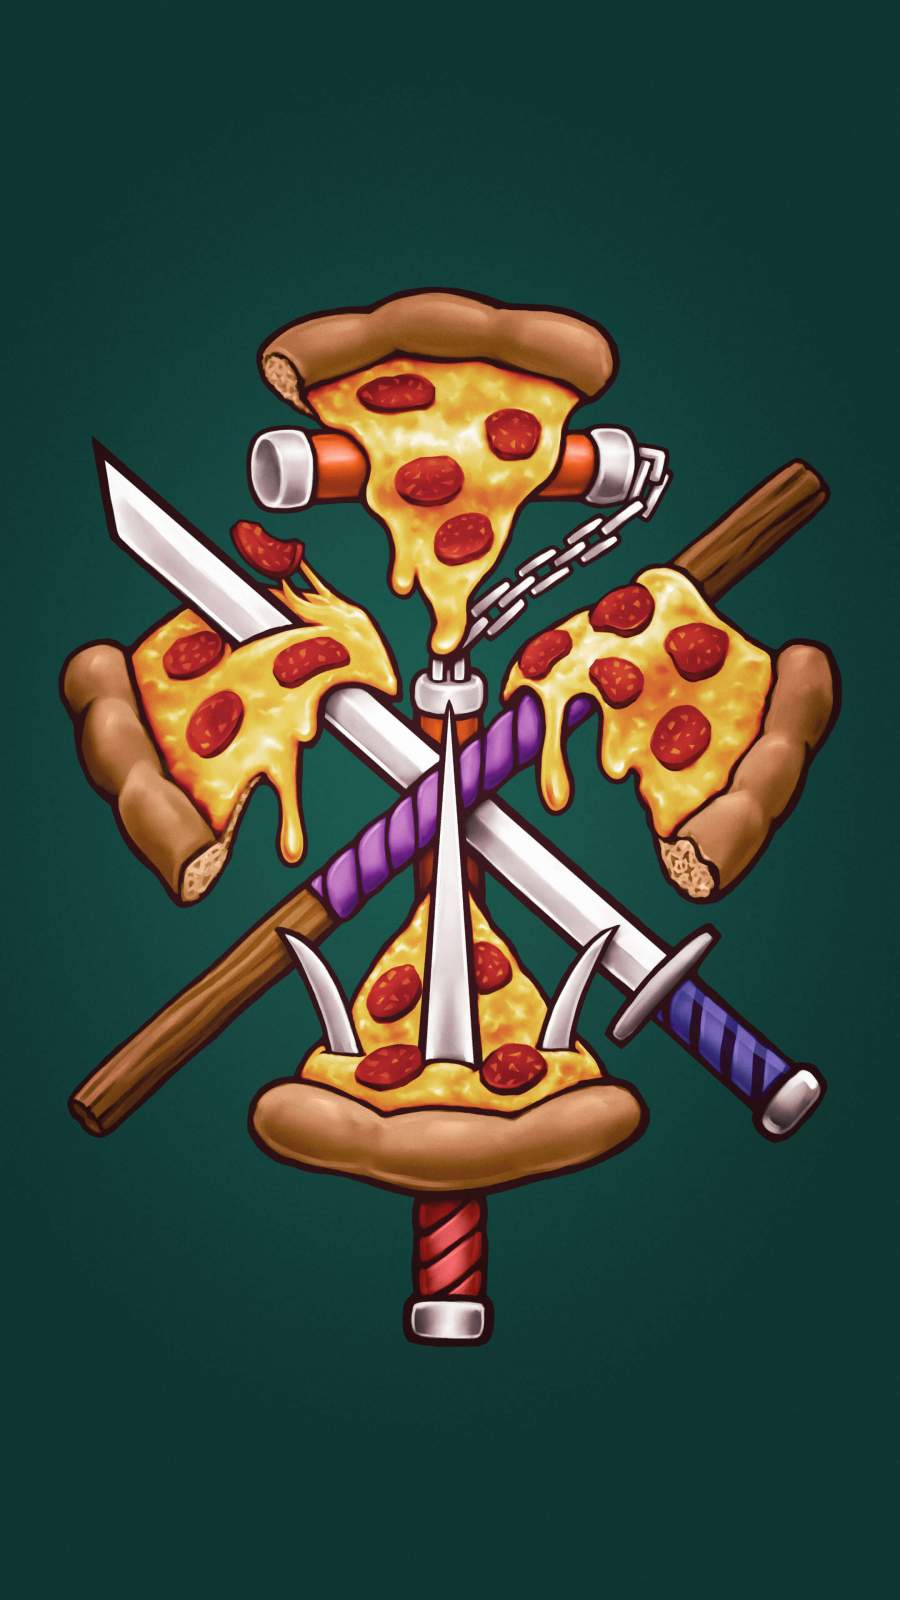 Pizza slices and pizza slices with axes on a green background - Pizza